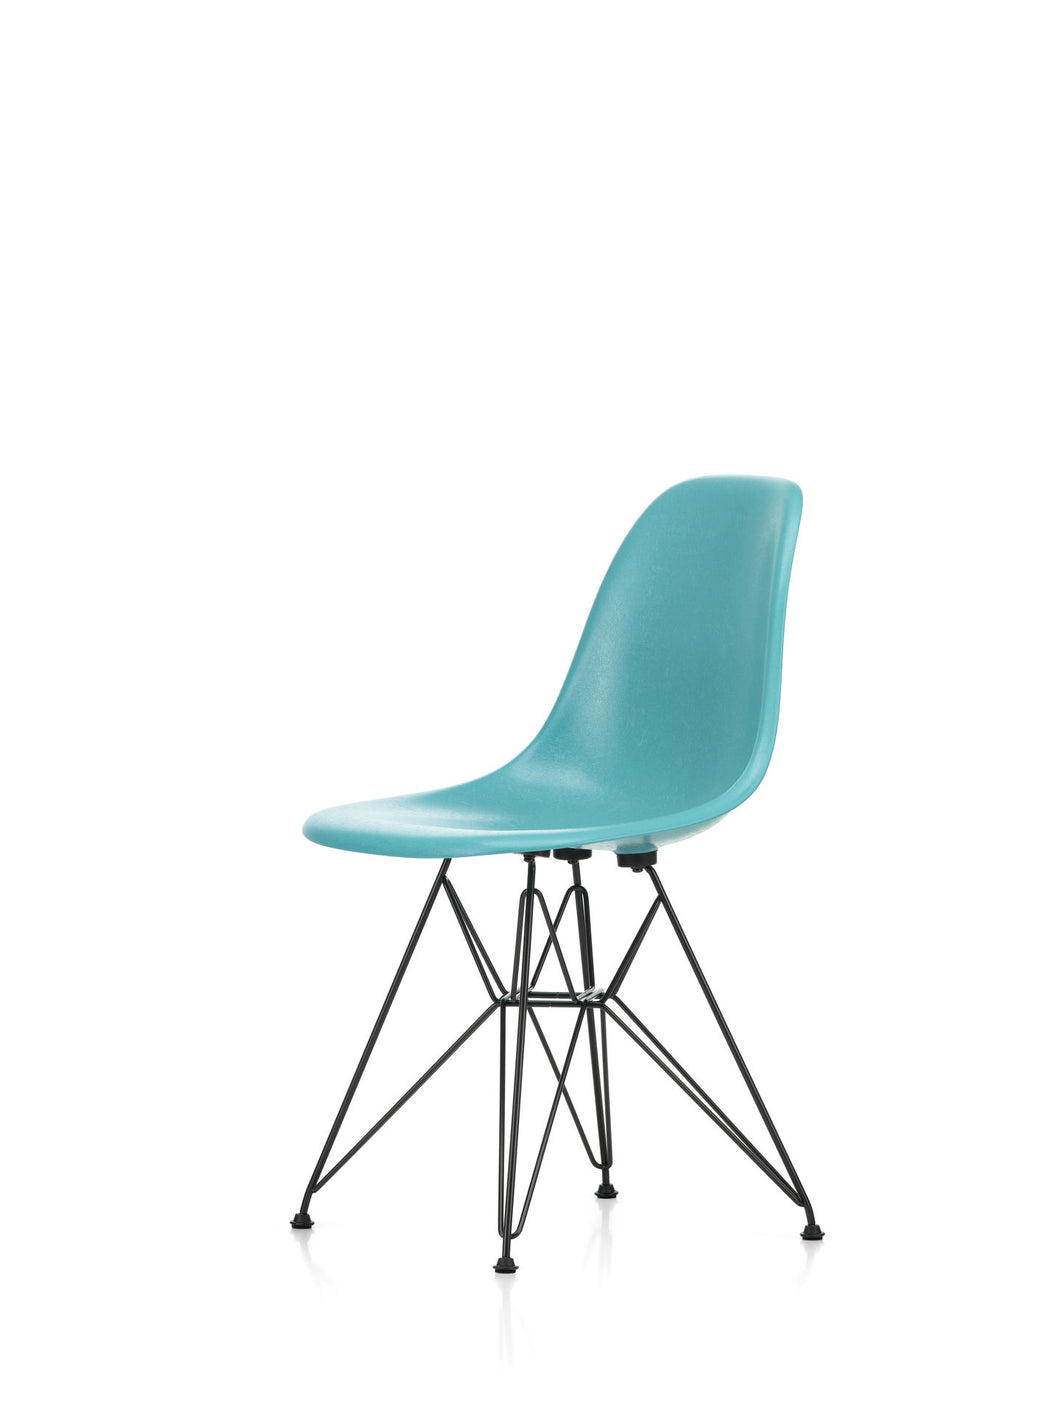 Eames Fiberglass Chair DSR Limited Edition turquoise